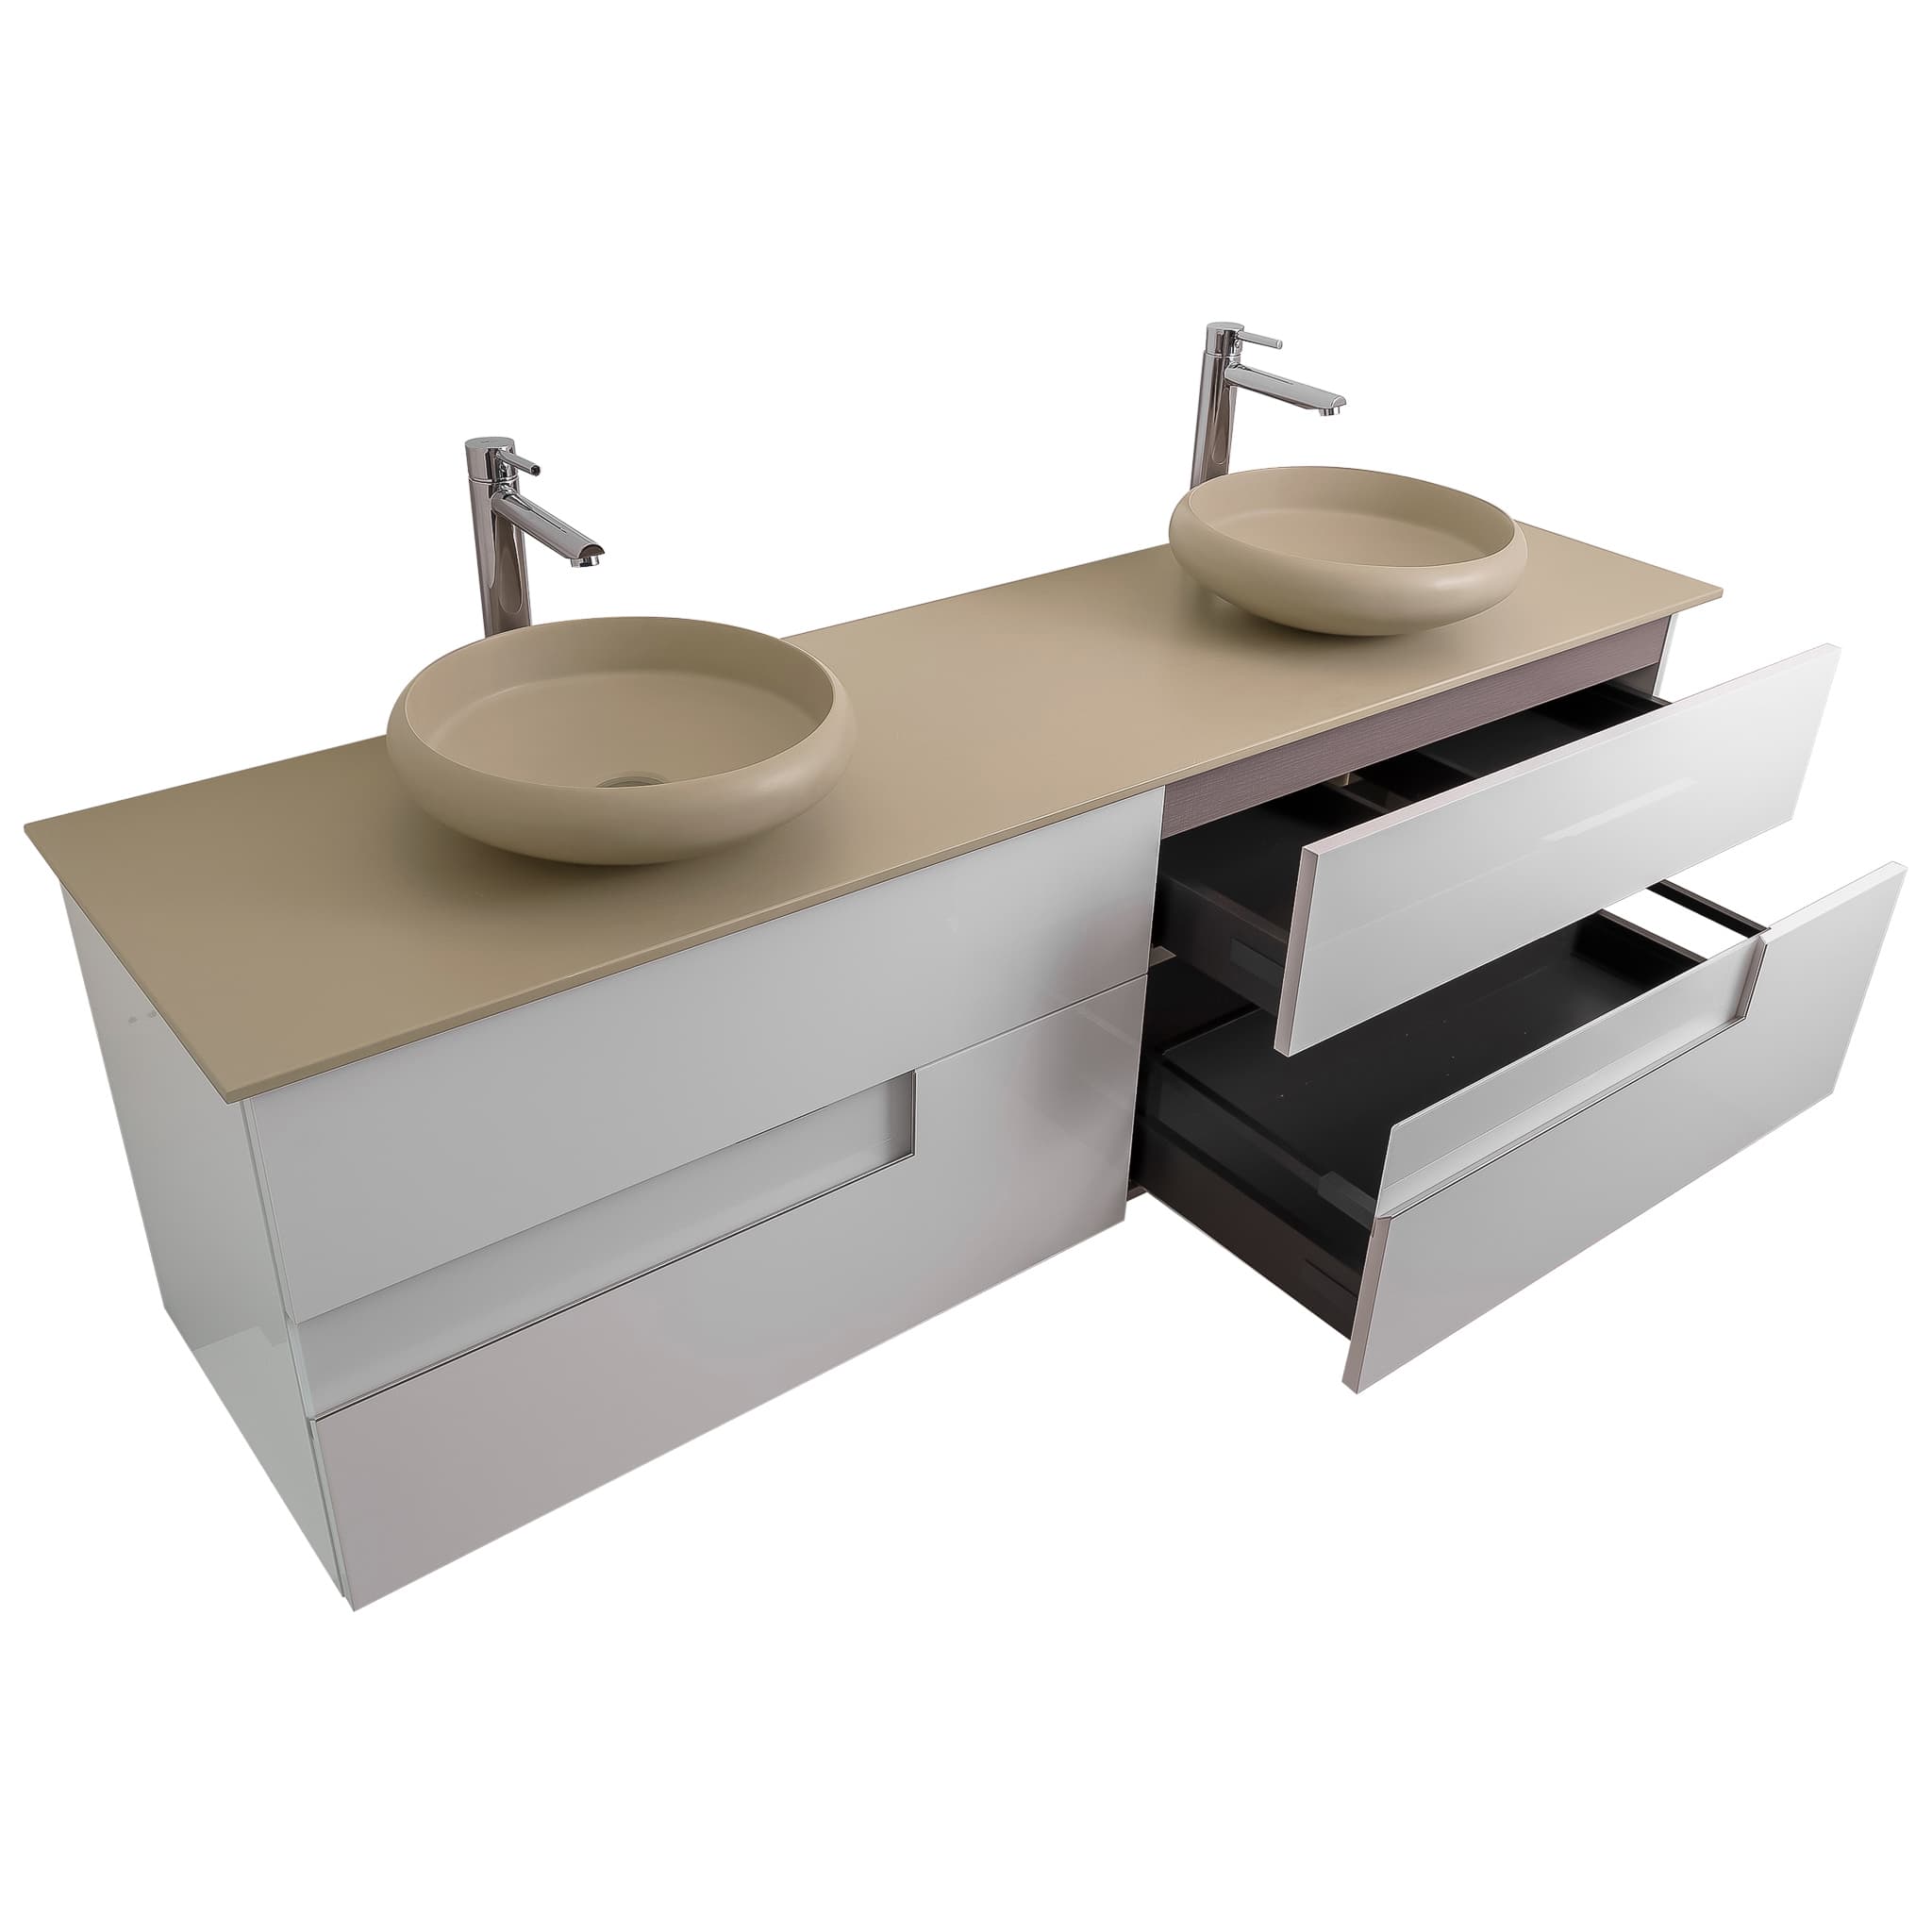 Vision 63 White High Gloss Cabinet, Solid Surface Flat Taupe Counter And Two Round Solid Surface Taupe Basin 1153, Wall Mounted Modern Vanity Set